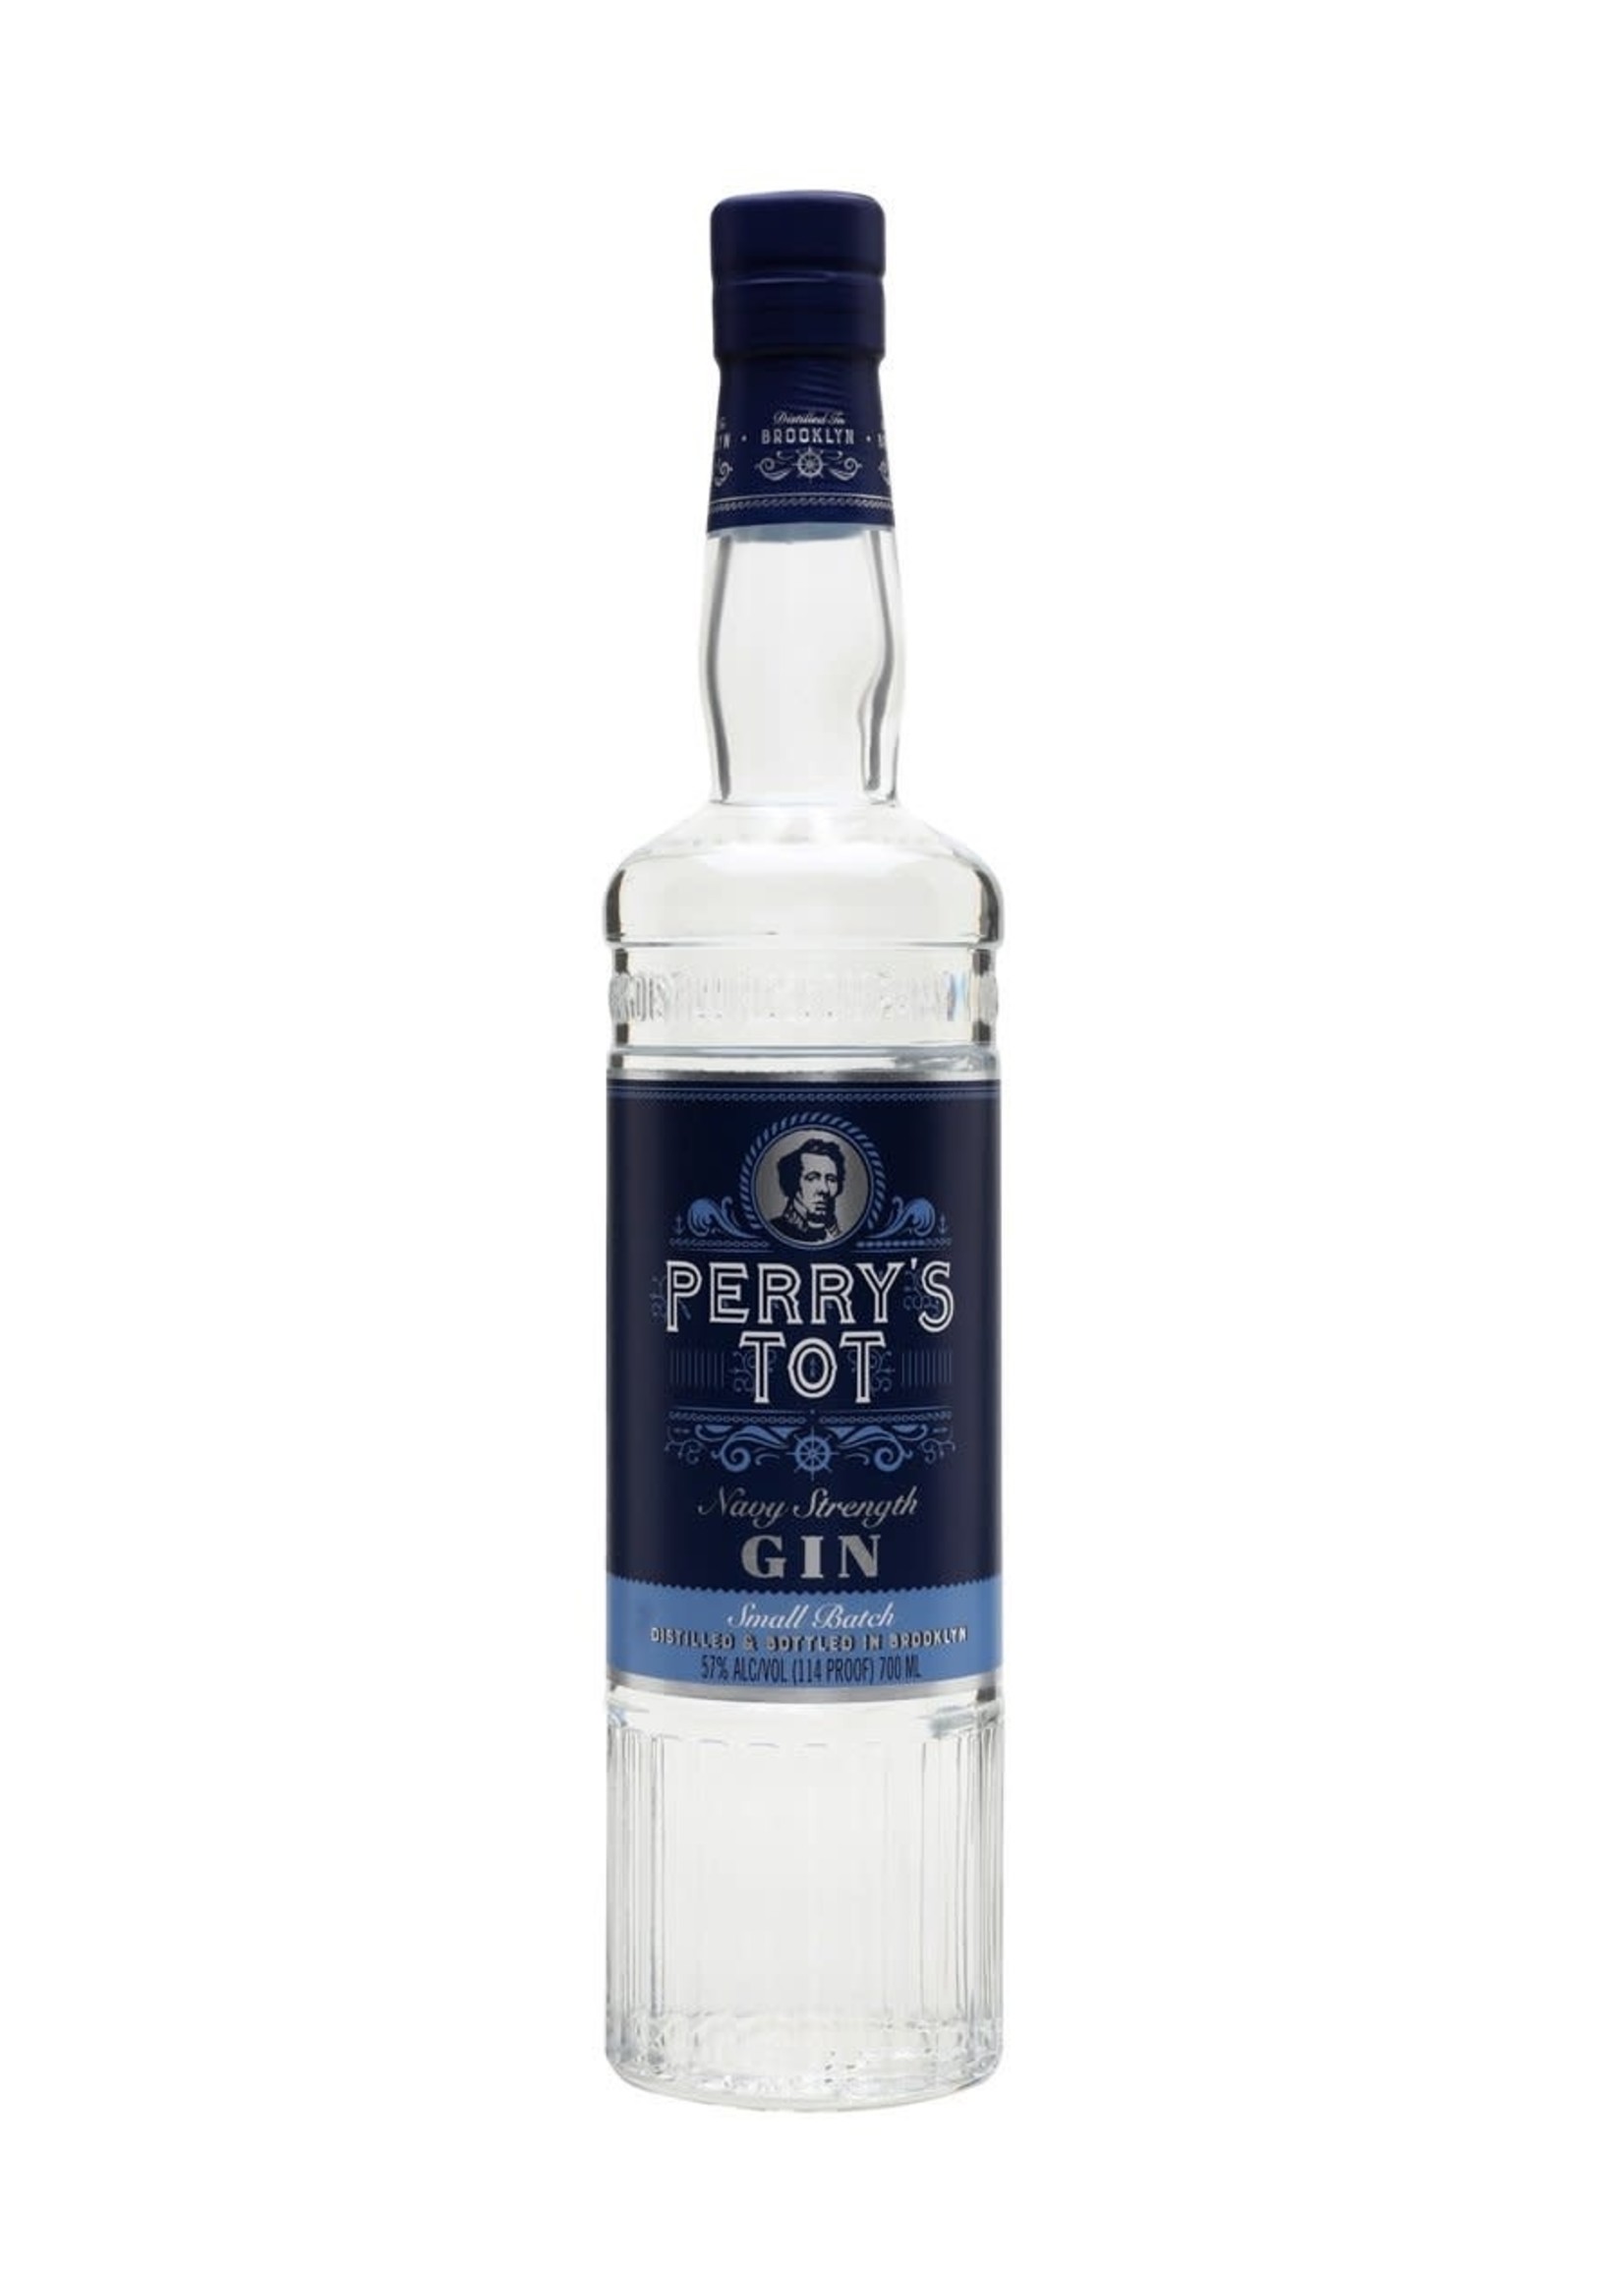 New York Distilling Company Perry's Tot / Navy Strength Dry Gin 114 proof / 750mL